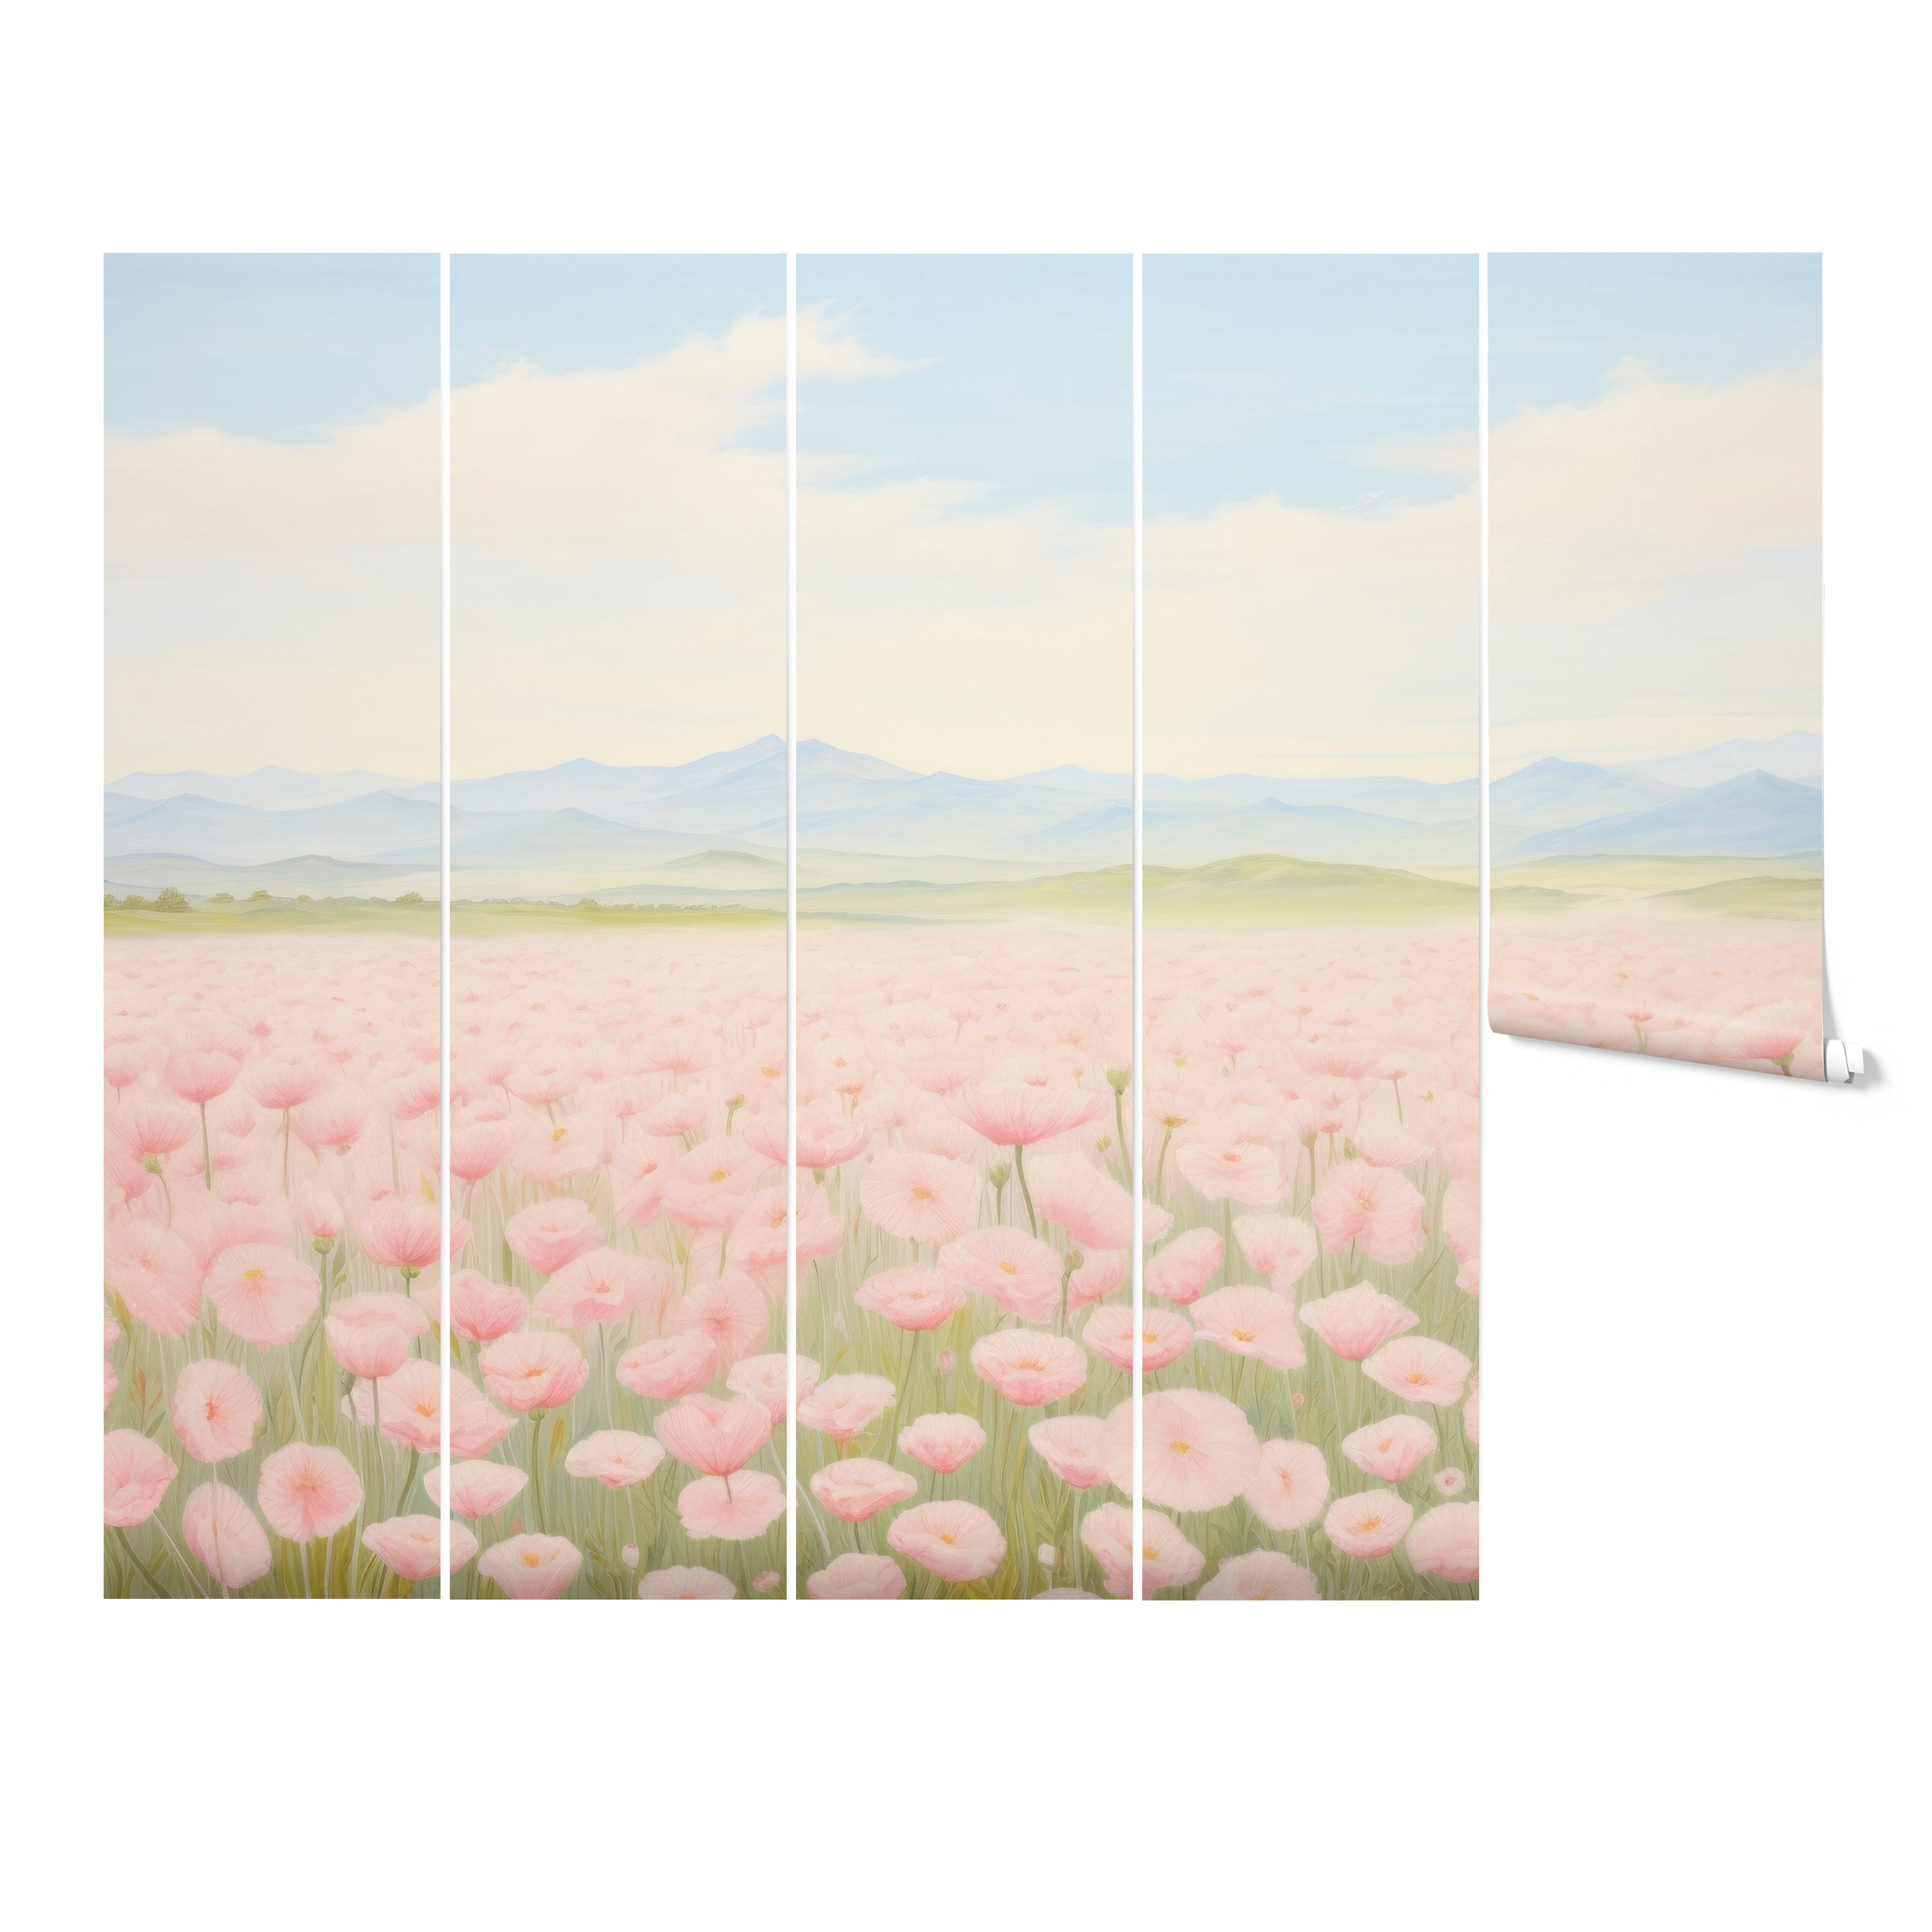 "Meadow Dreaming wallpaper mural featuring soft pink blossoms and distant mountain views."